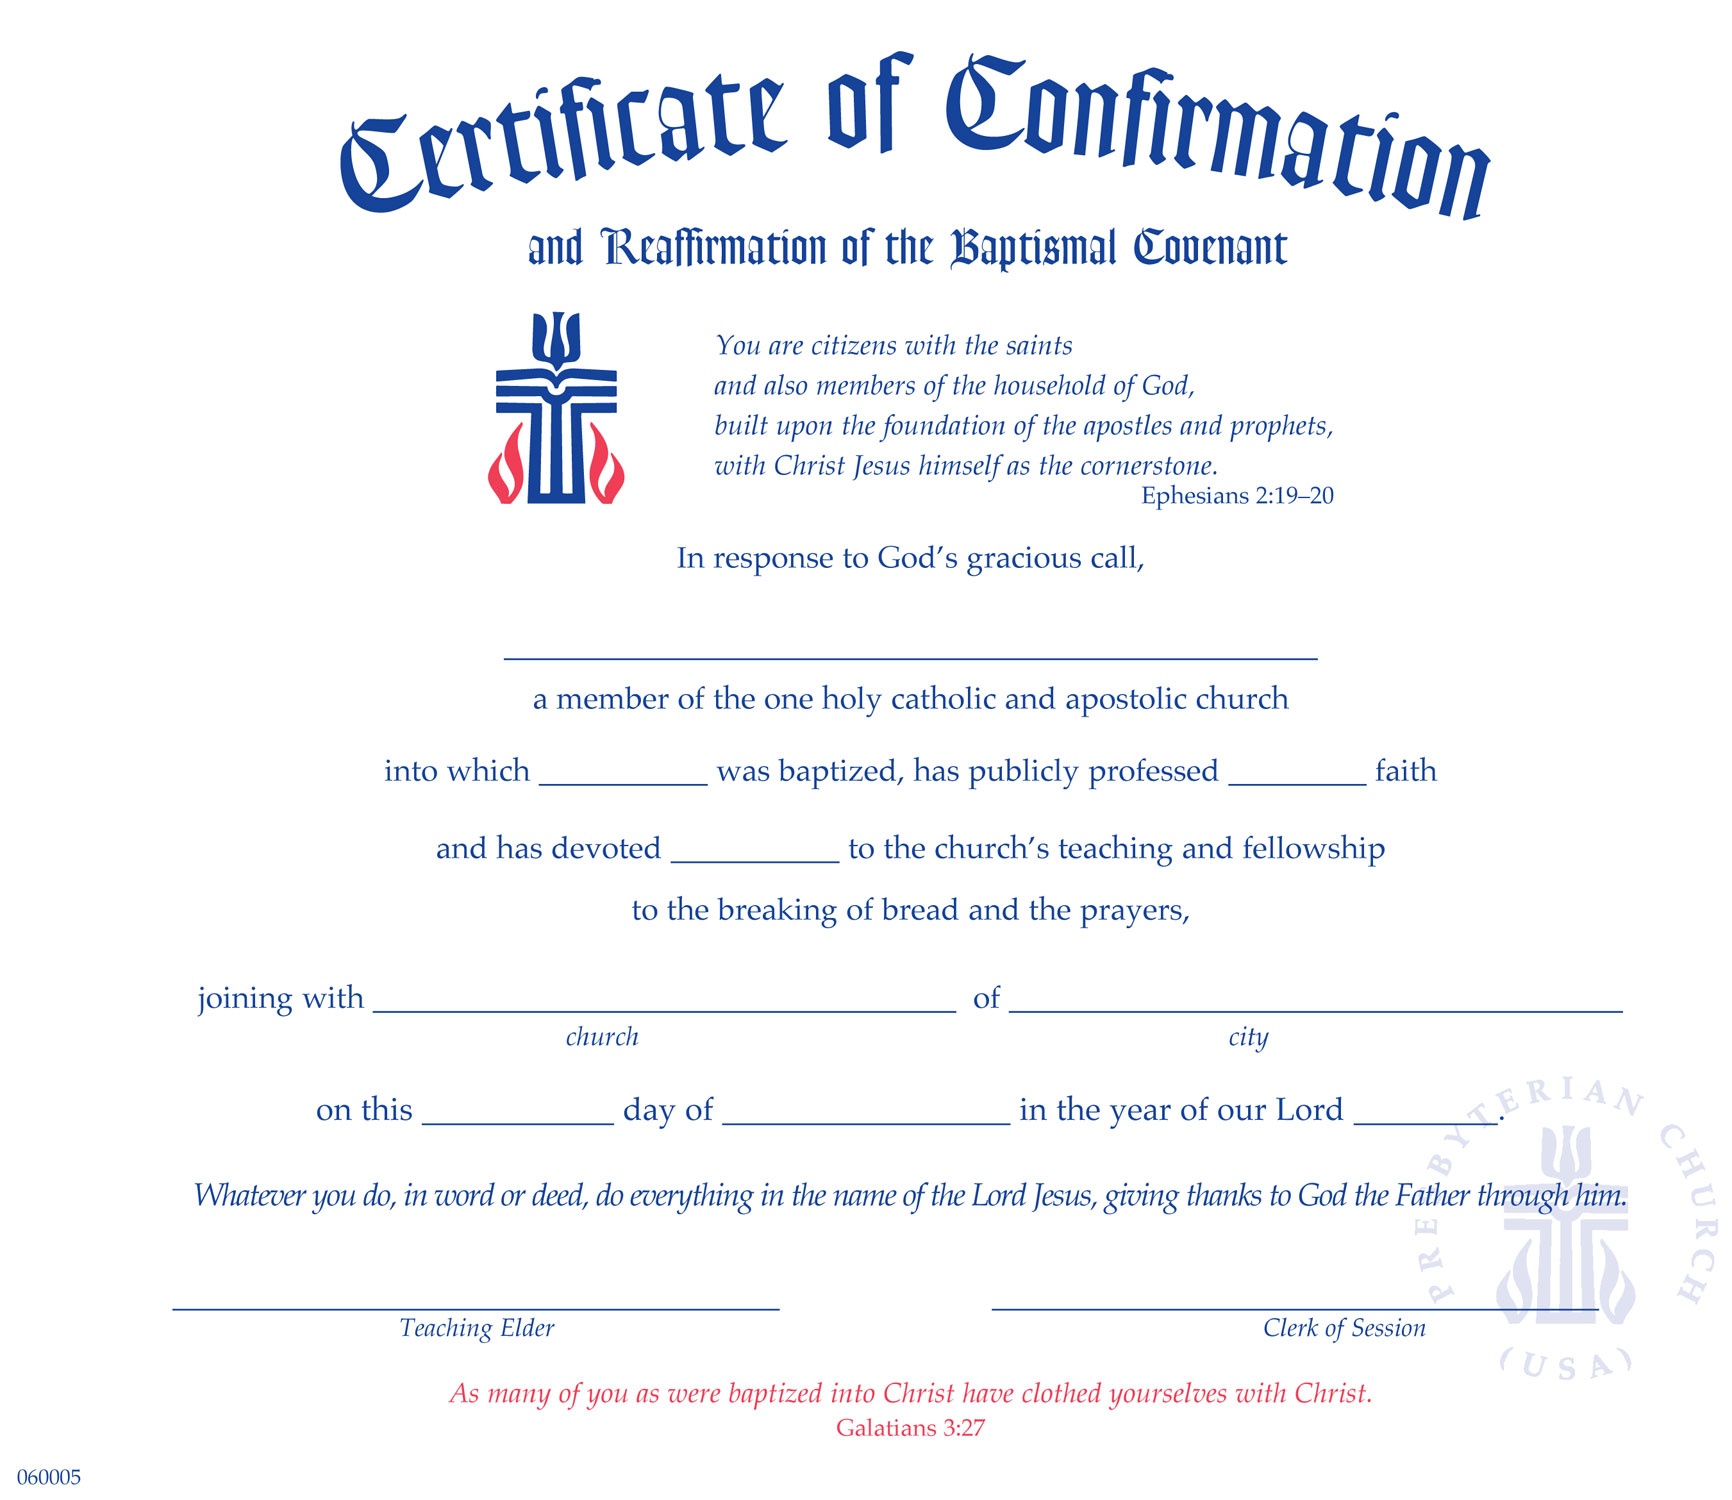 Certificate of Confirmation